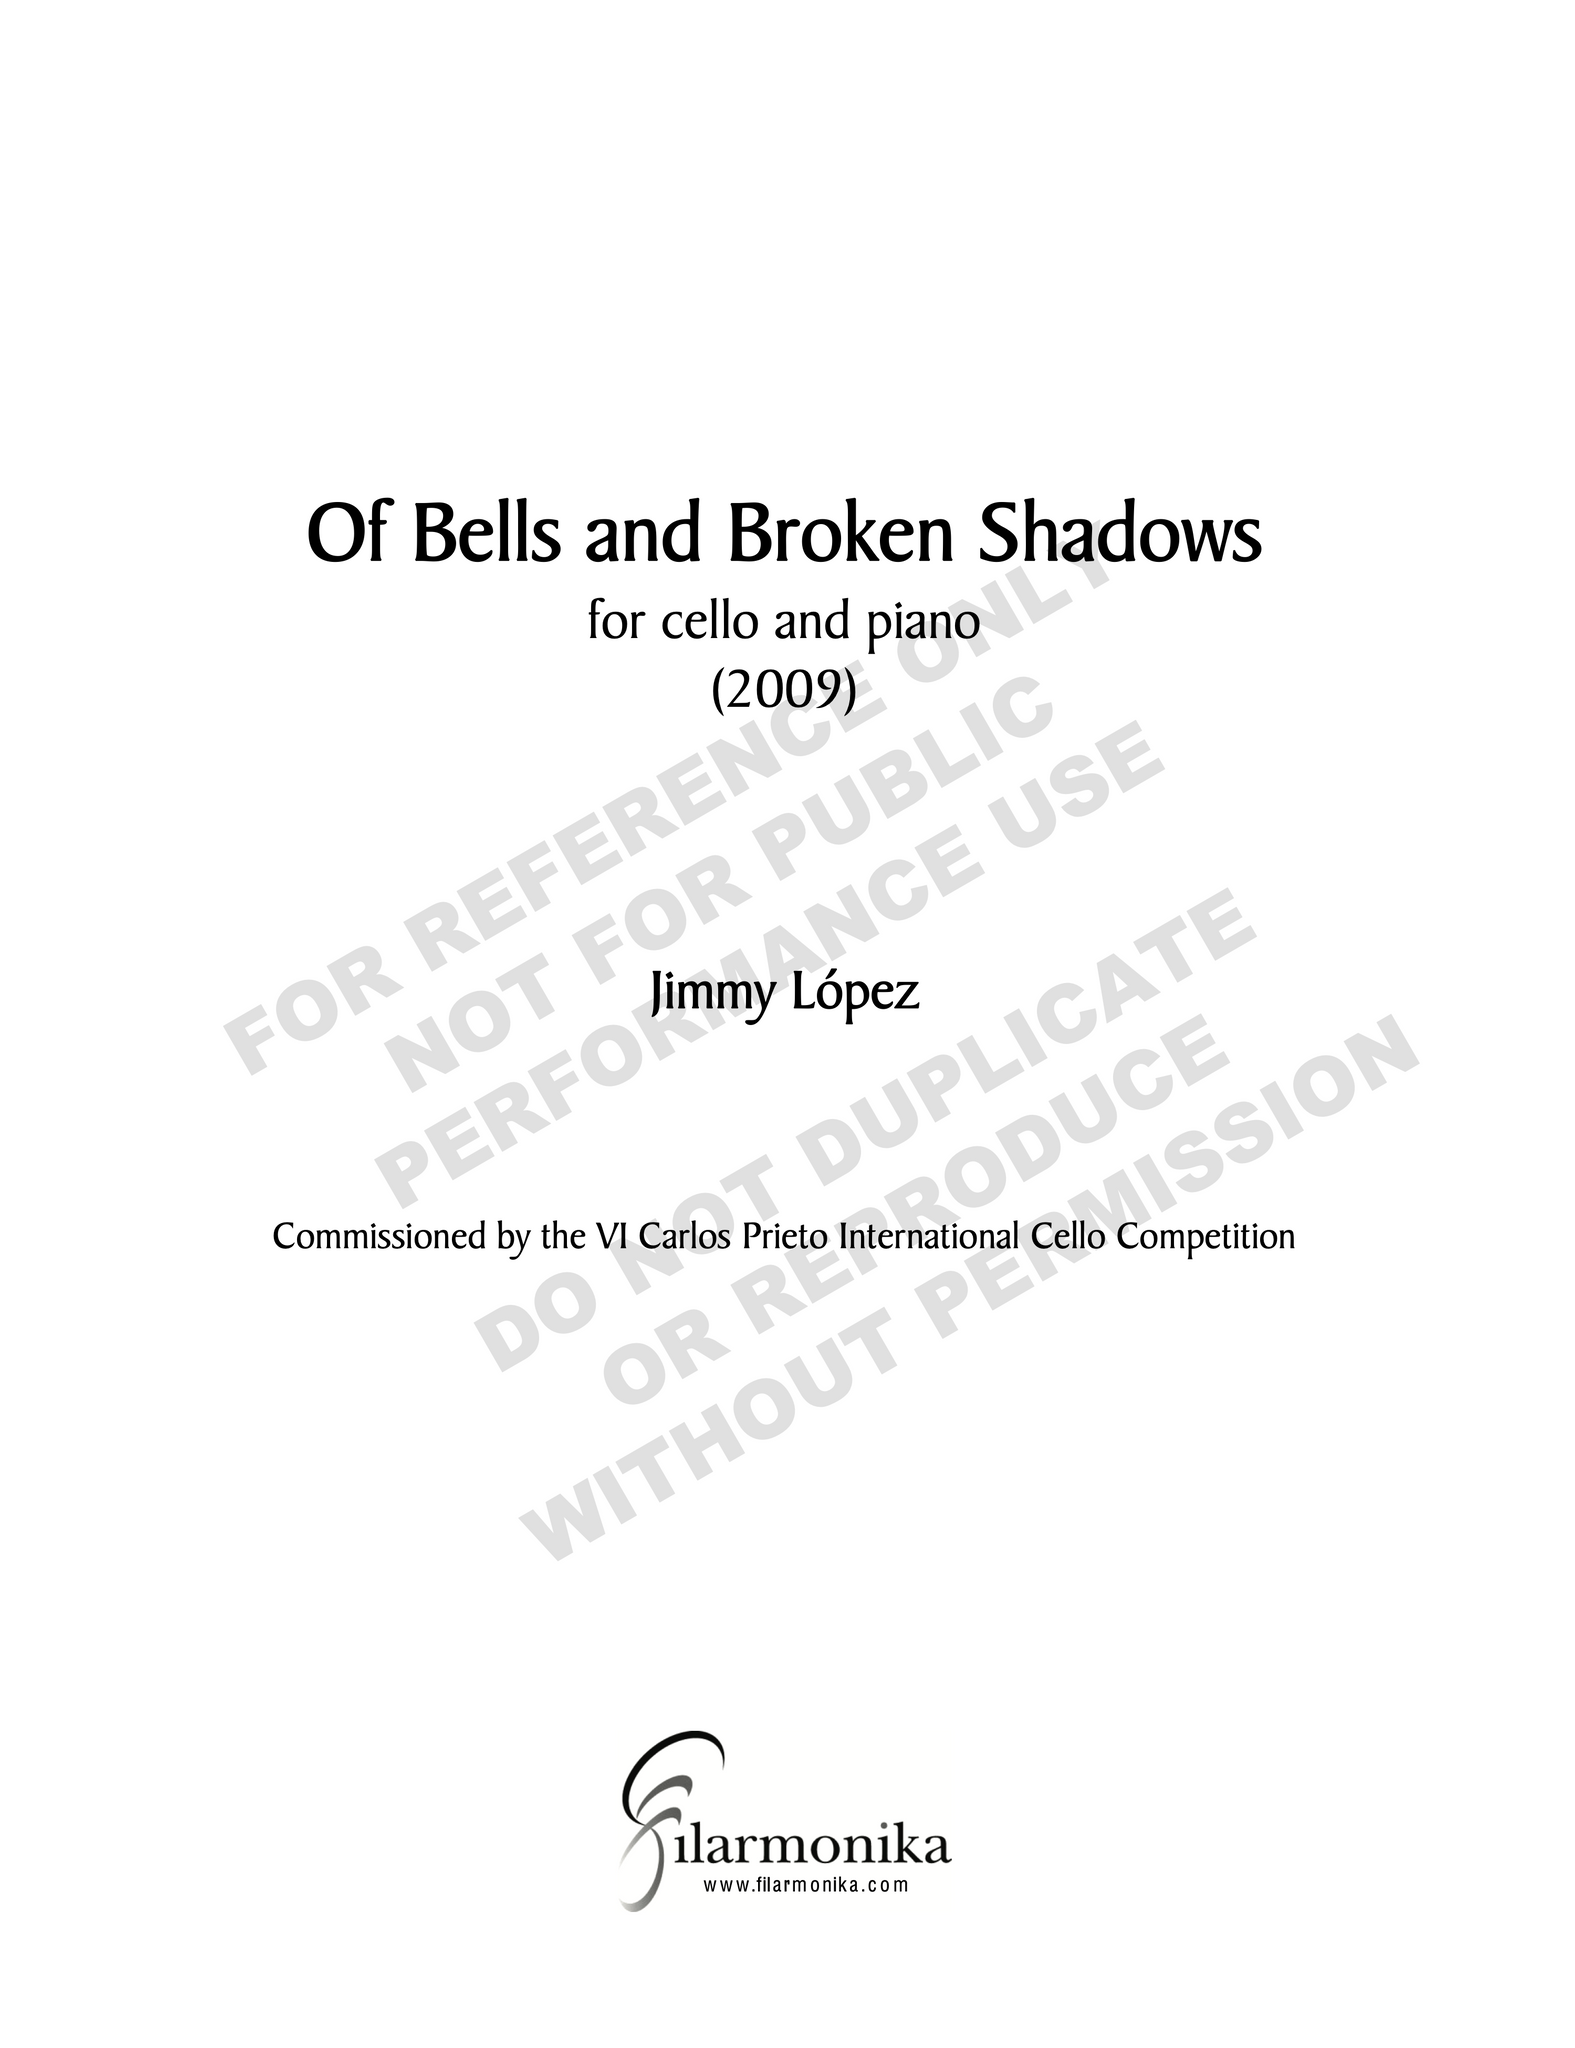 Of Bells and Broken Shadows, for cello and piano